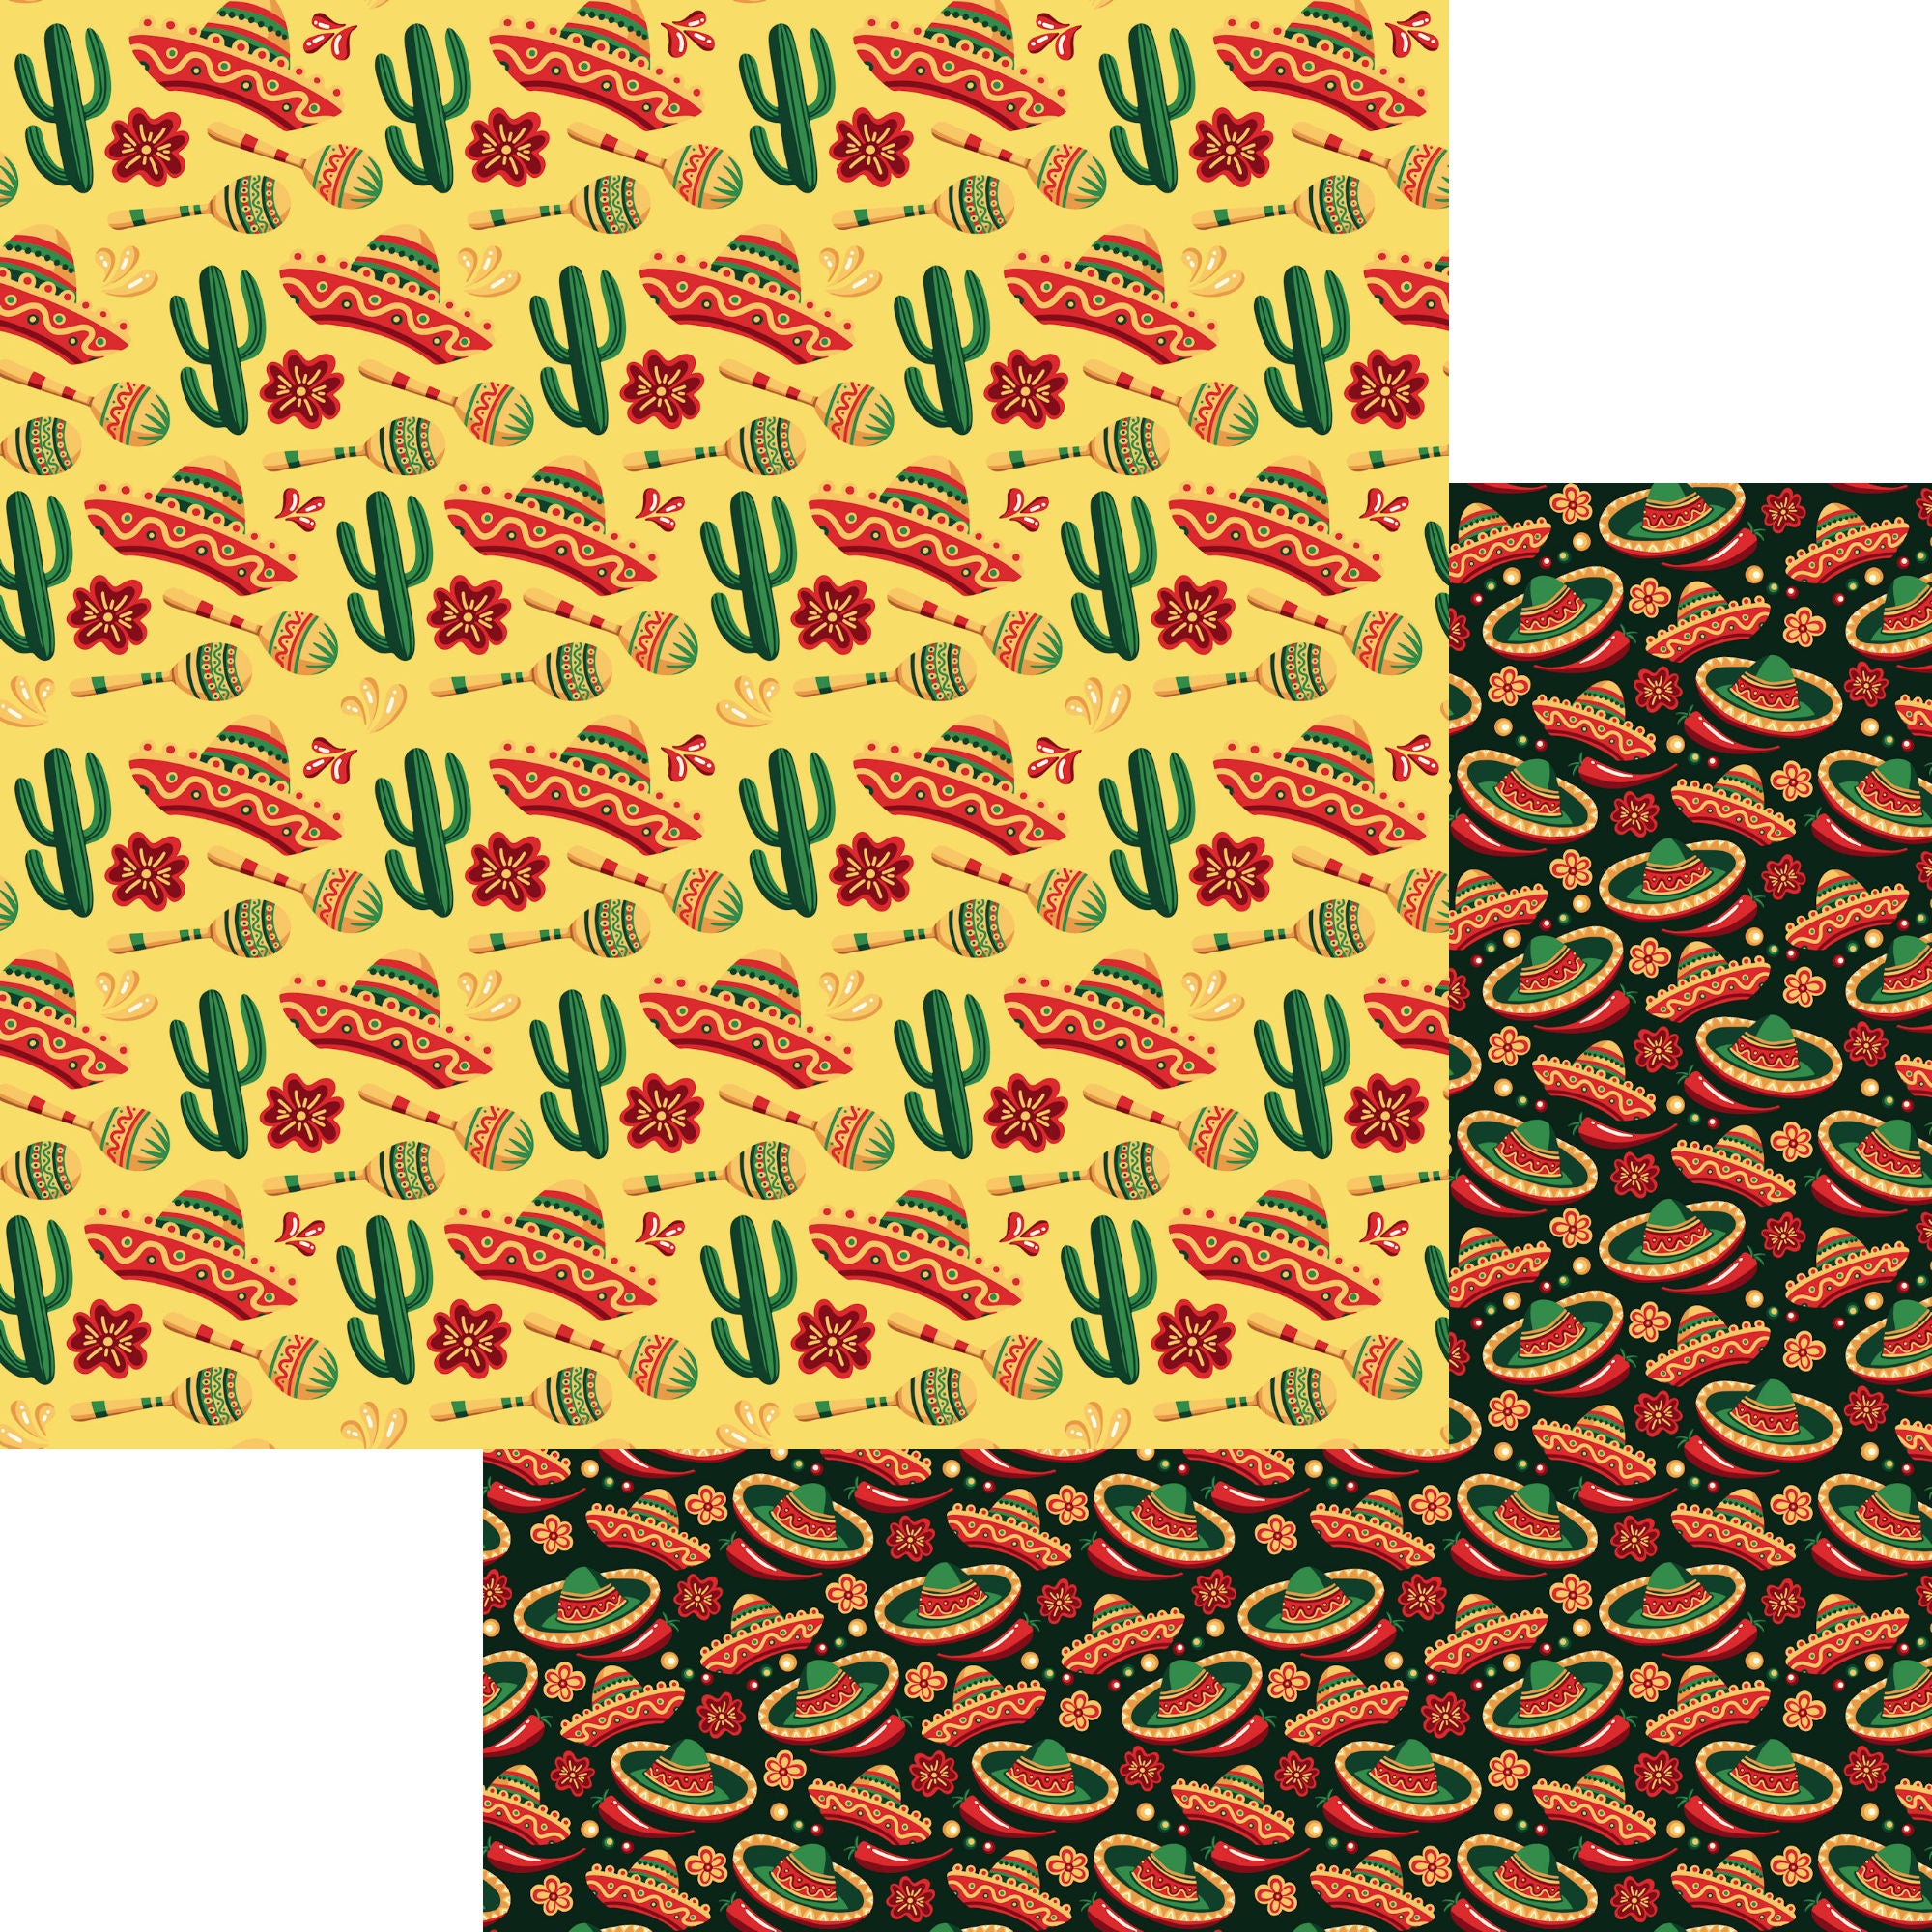 Cinco De Mayo Collection Sombrero 12 x 12 Double-Sided Scrapbook Paper by SSC Designs